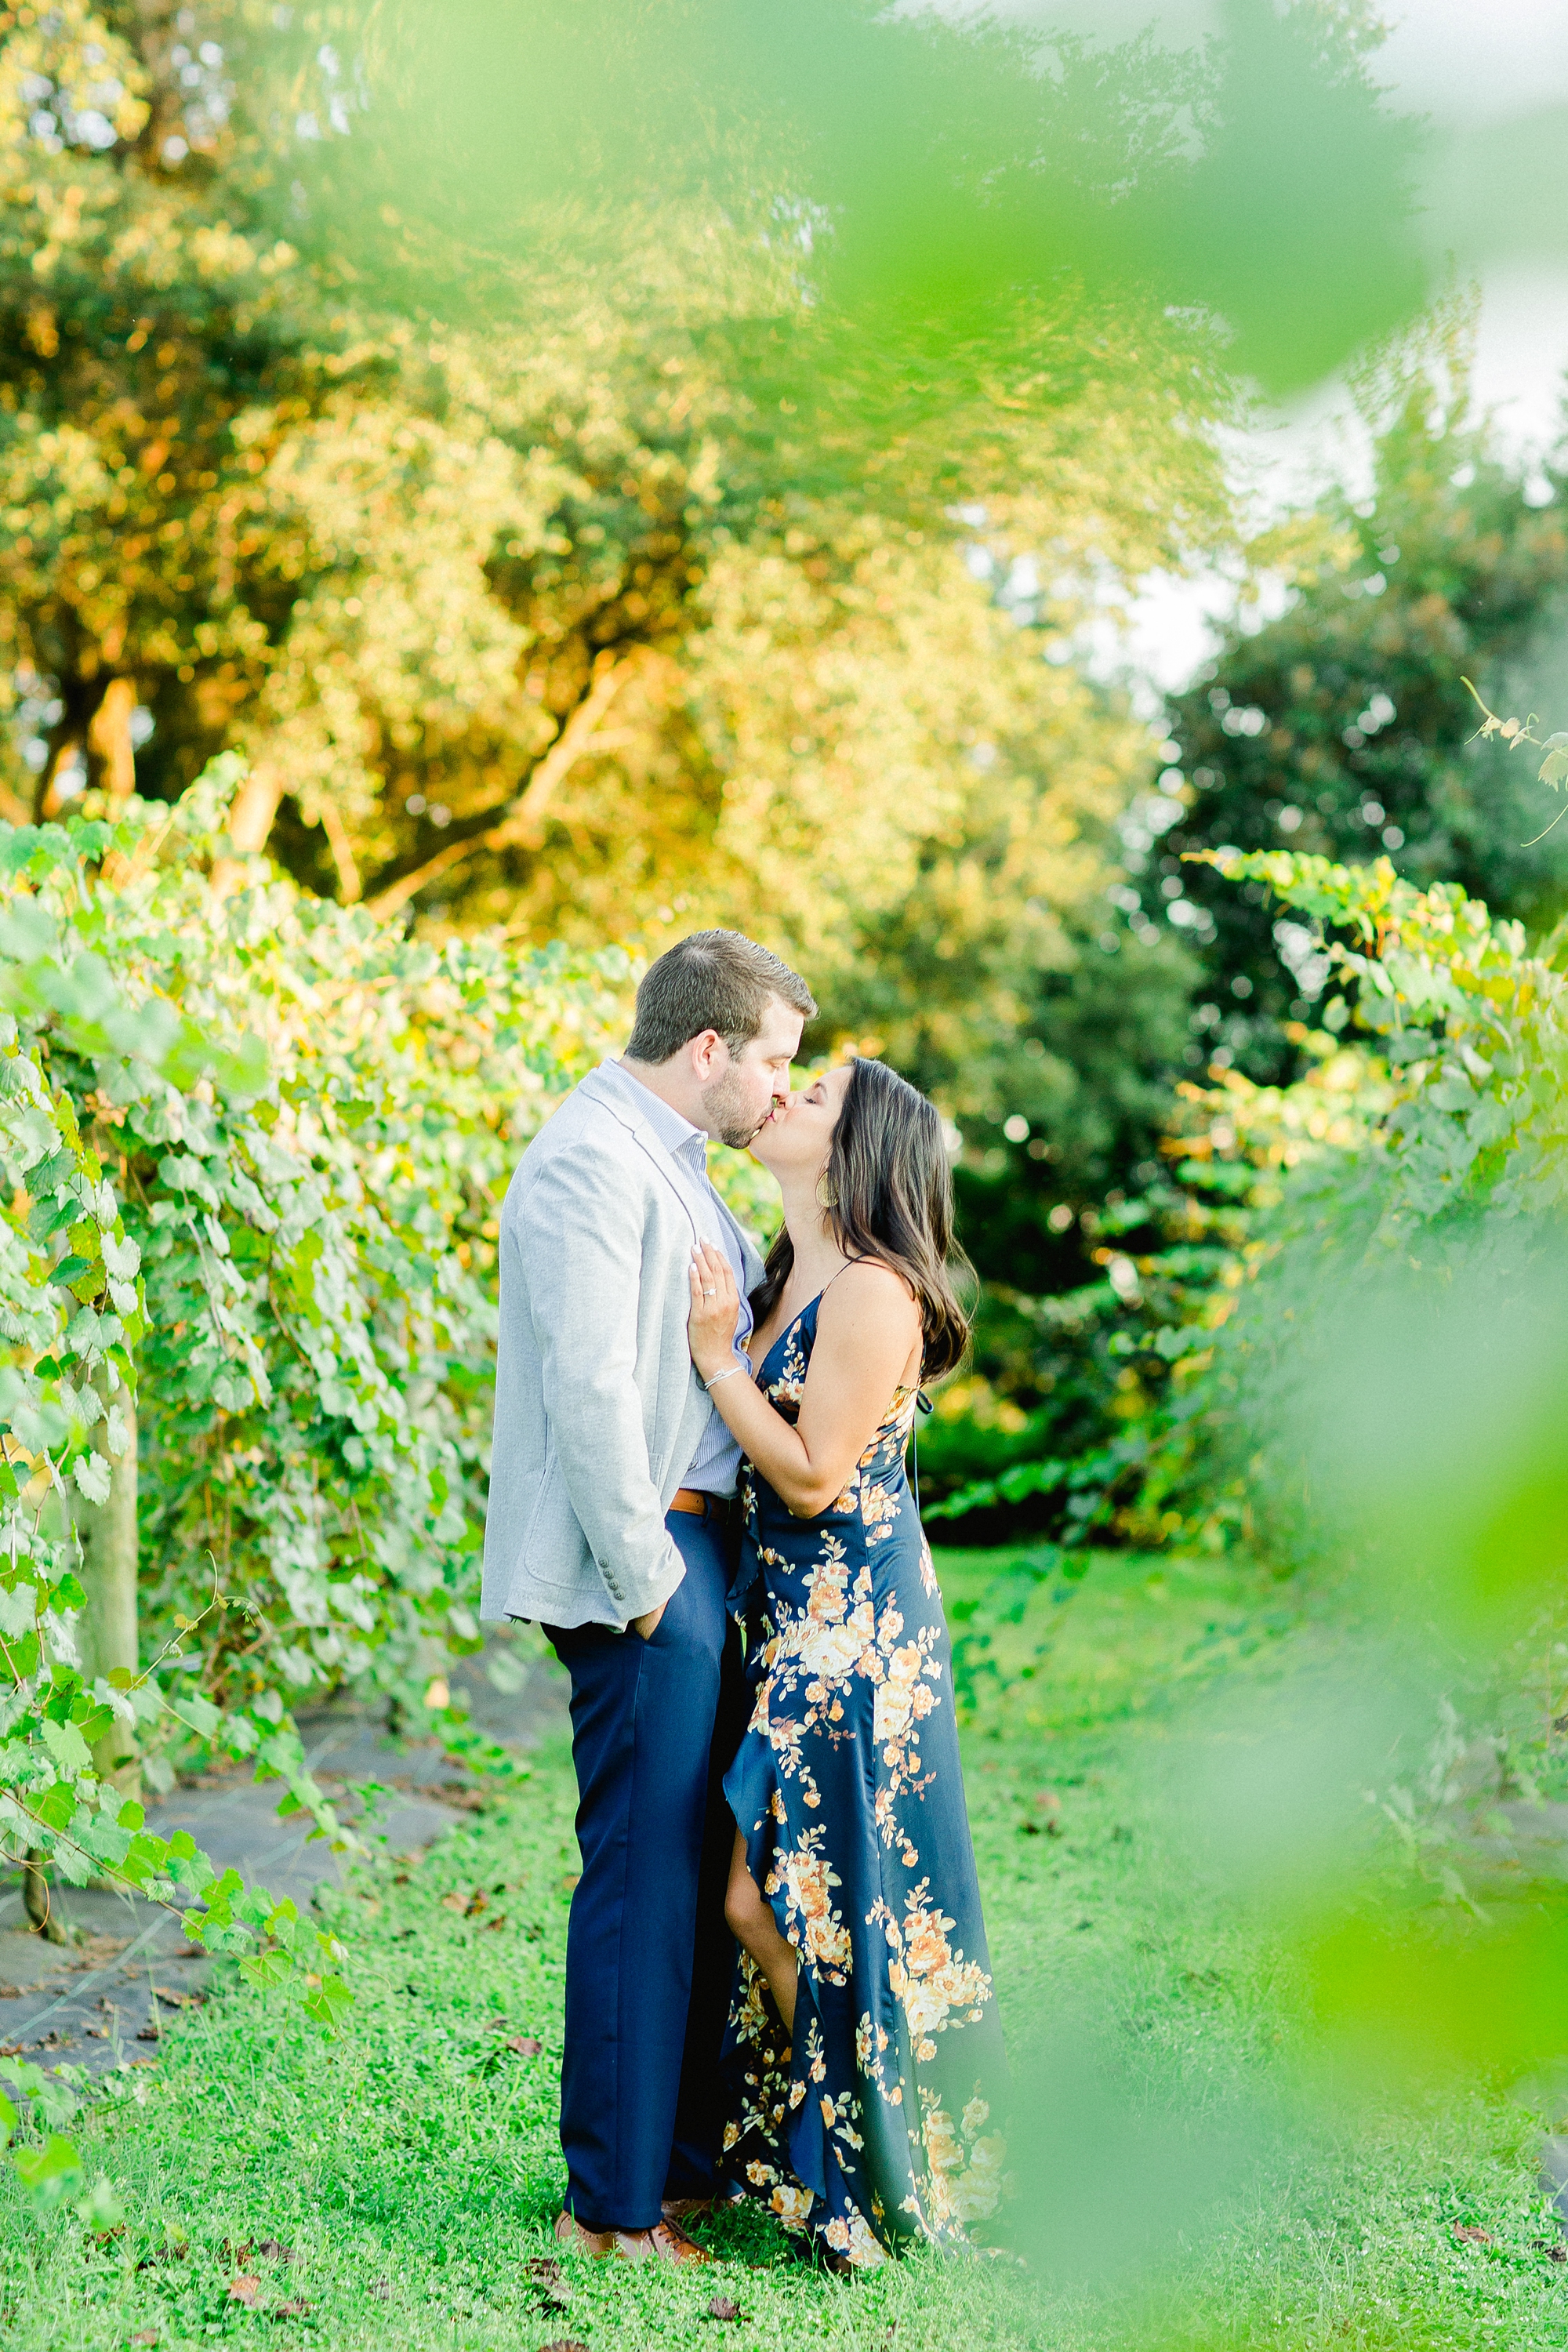 Mision Lago Ranch Engagement | © Ailyn La Torre Photography 2019